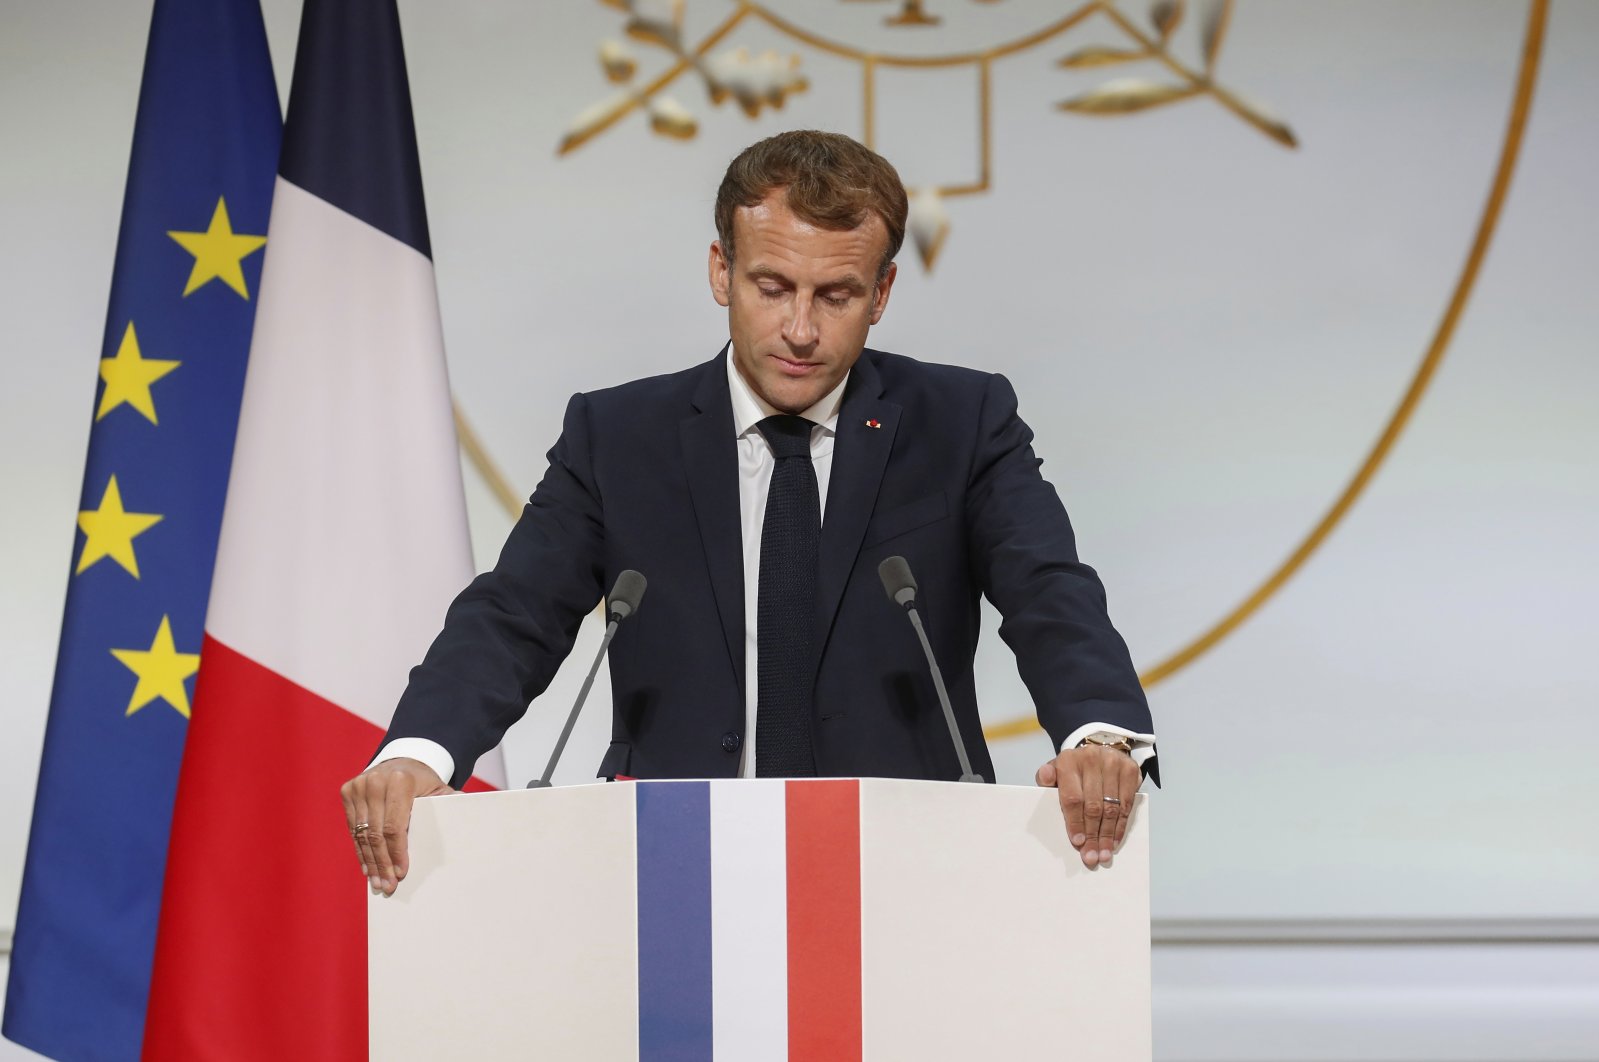 French President Emmanuel Macron pauses as he delivers a speech during a meeting in memory of the Algerians who fought alongside French colonial forces in Algeria's war of independence, known as Harkis, at the Elysee Palace in Paris, France, Sept. 20, 2021. (Pool Photo via AP)